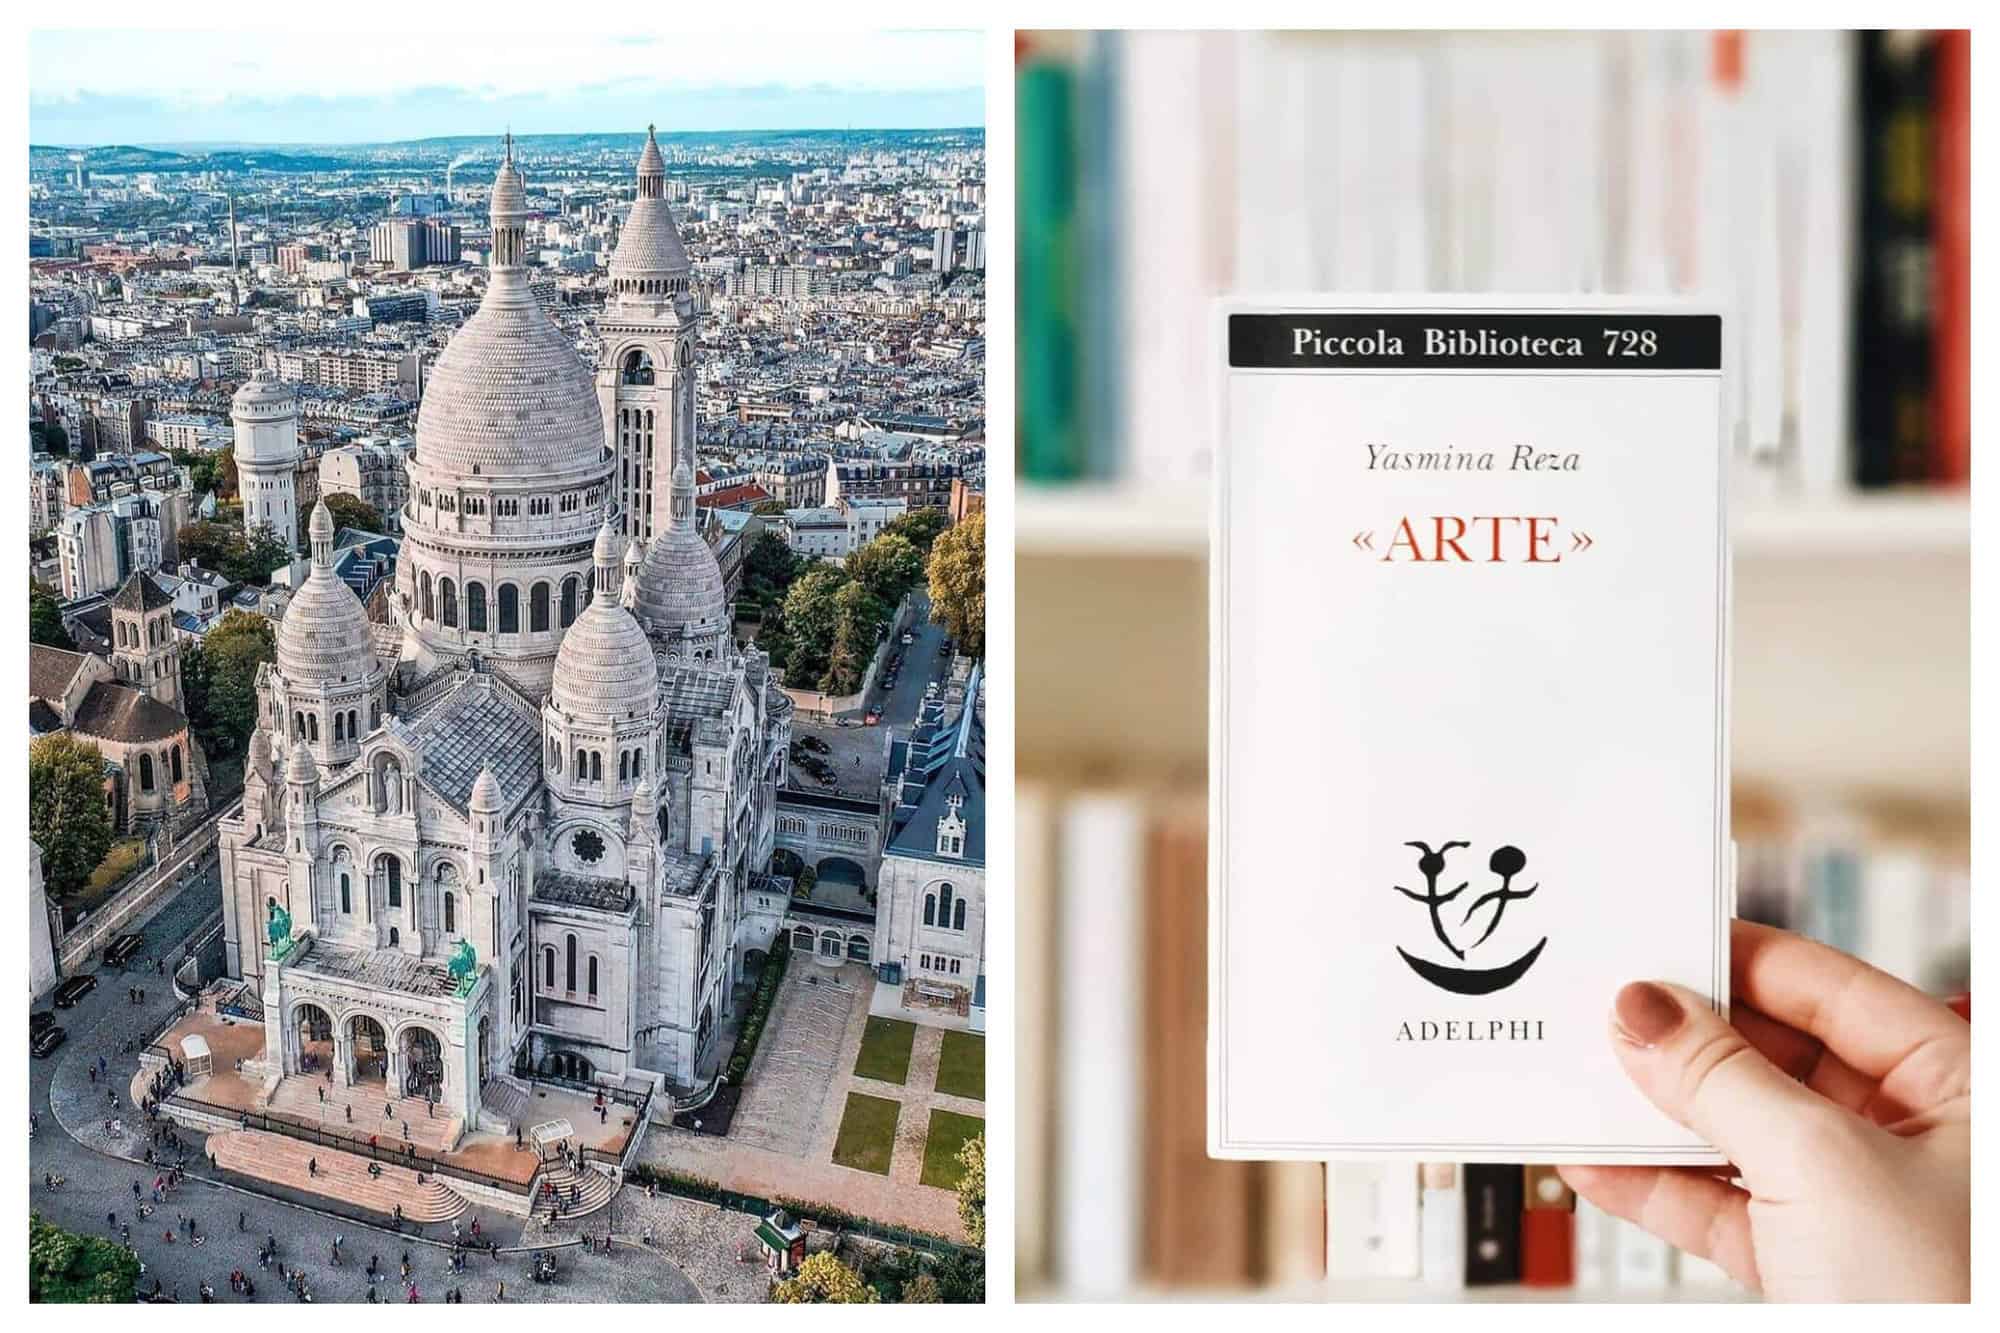 Left: A bird's eyeview of the Basilique du Sacre Coeur is captured with its surrounding buildings, all mostly in different shades of gray. The blue sky can be seen in the back too. People can be seen coming in and out of the church. Right: A woman's right hand is holding the book "Arte" by french author Yasmina Reza. In this photo, the woman's hand and the book are focused while the background of bookshelves with books is blurred.